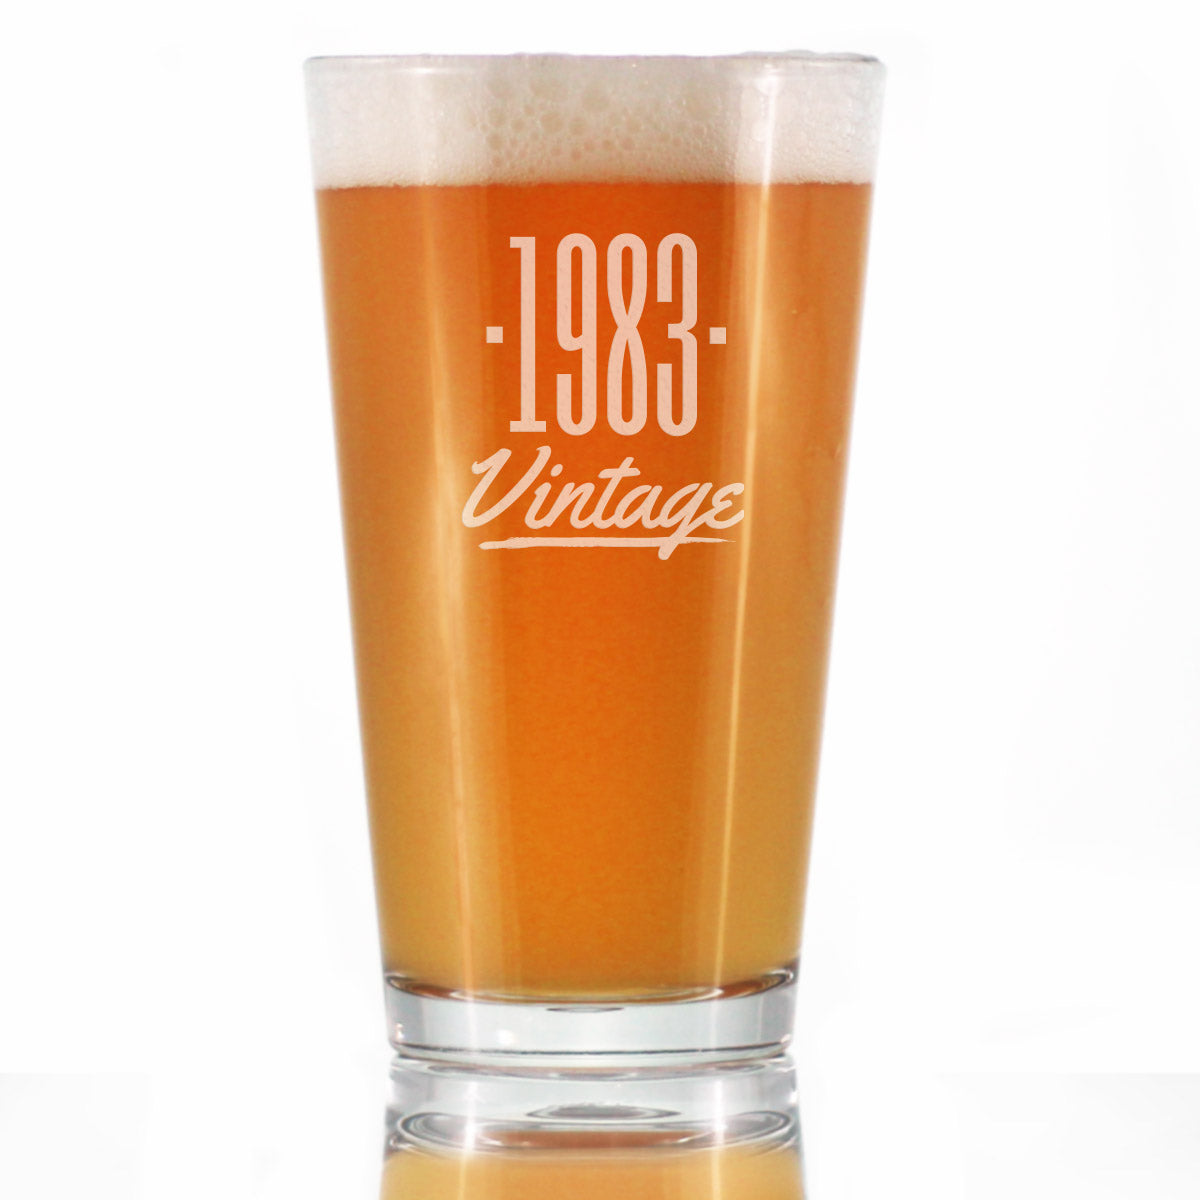 Vintage 1983 - Pint Glass for Beer - 40th Birthday Gifts for Men or Women Turning 40 - Fun Bday Party Decor - 16 oz